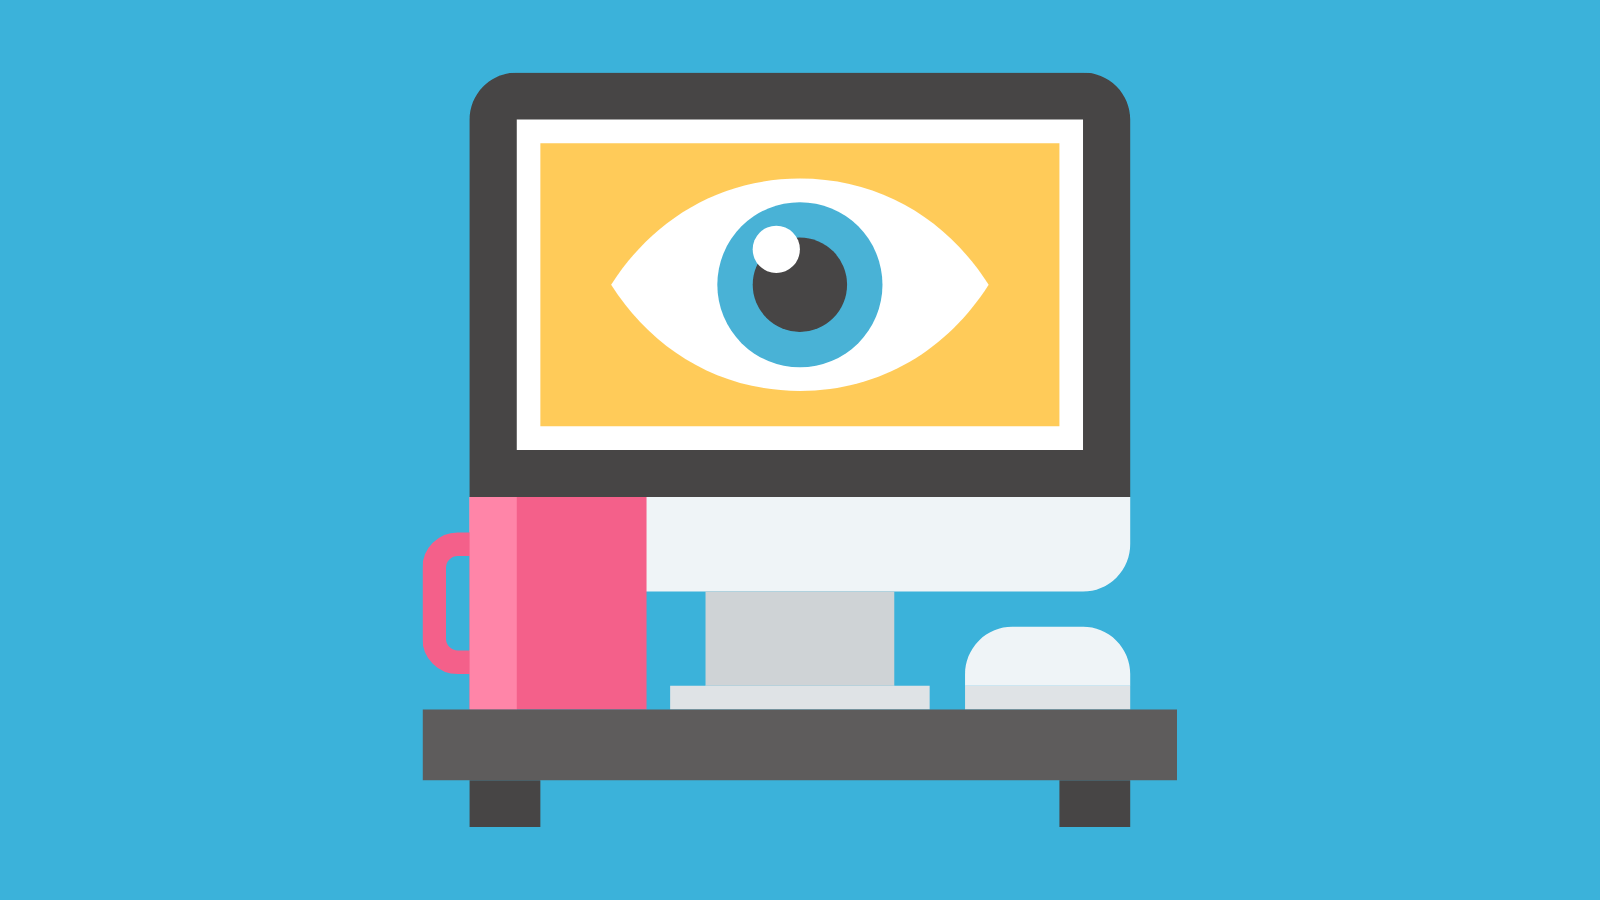 An illustration of a desktop computer with a picture of an eye on the screen